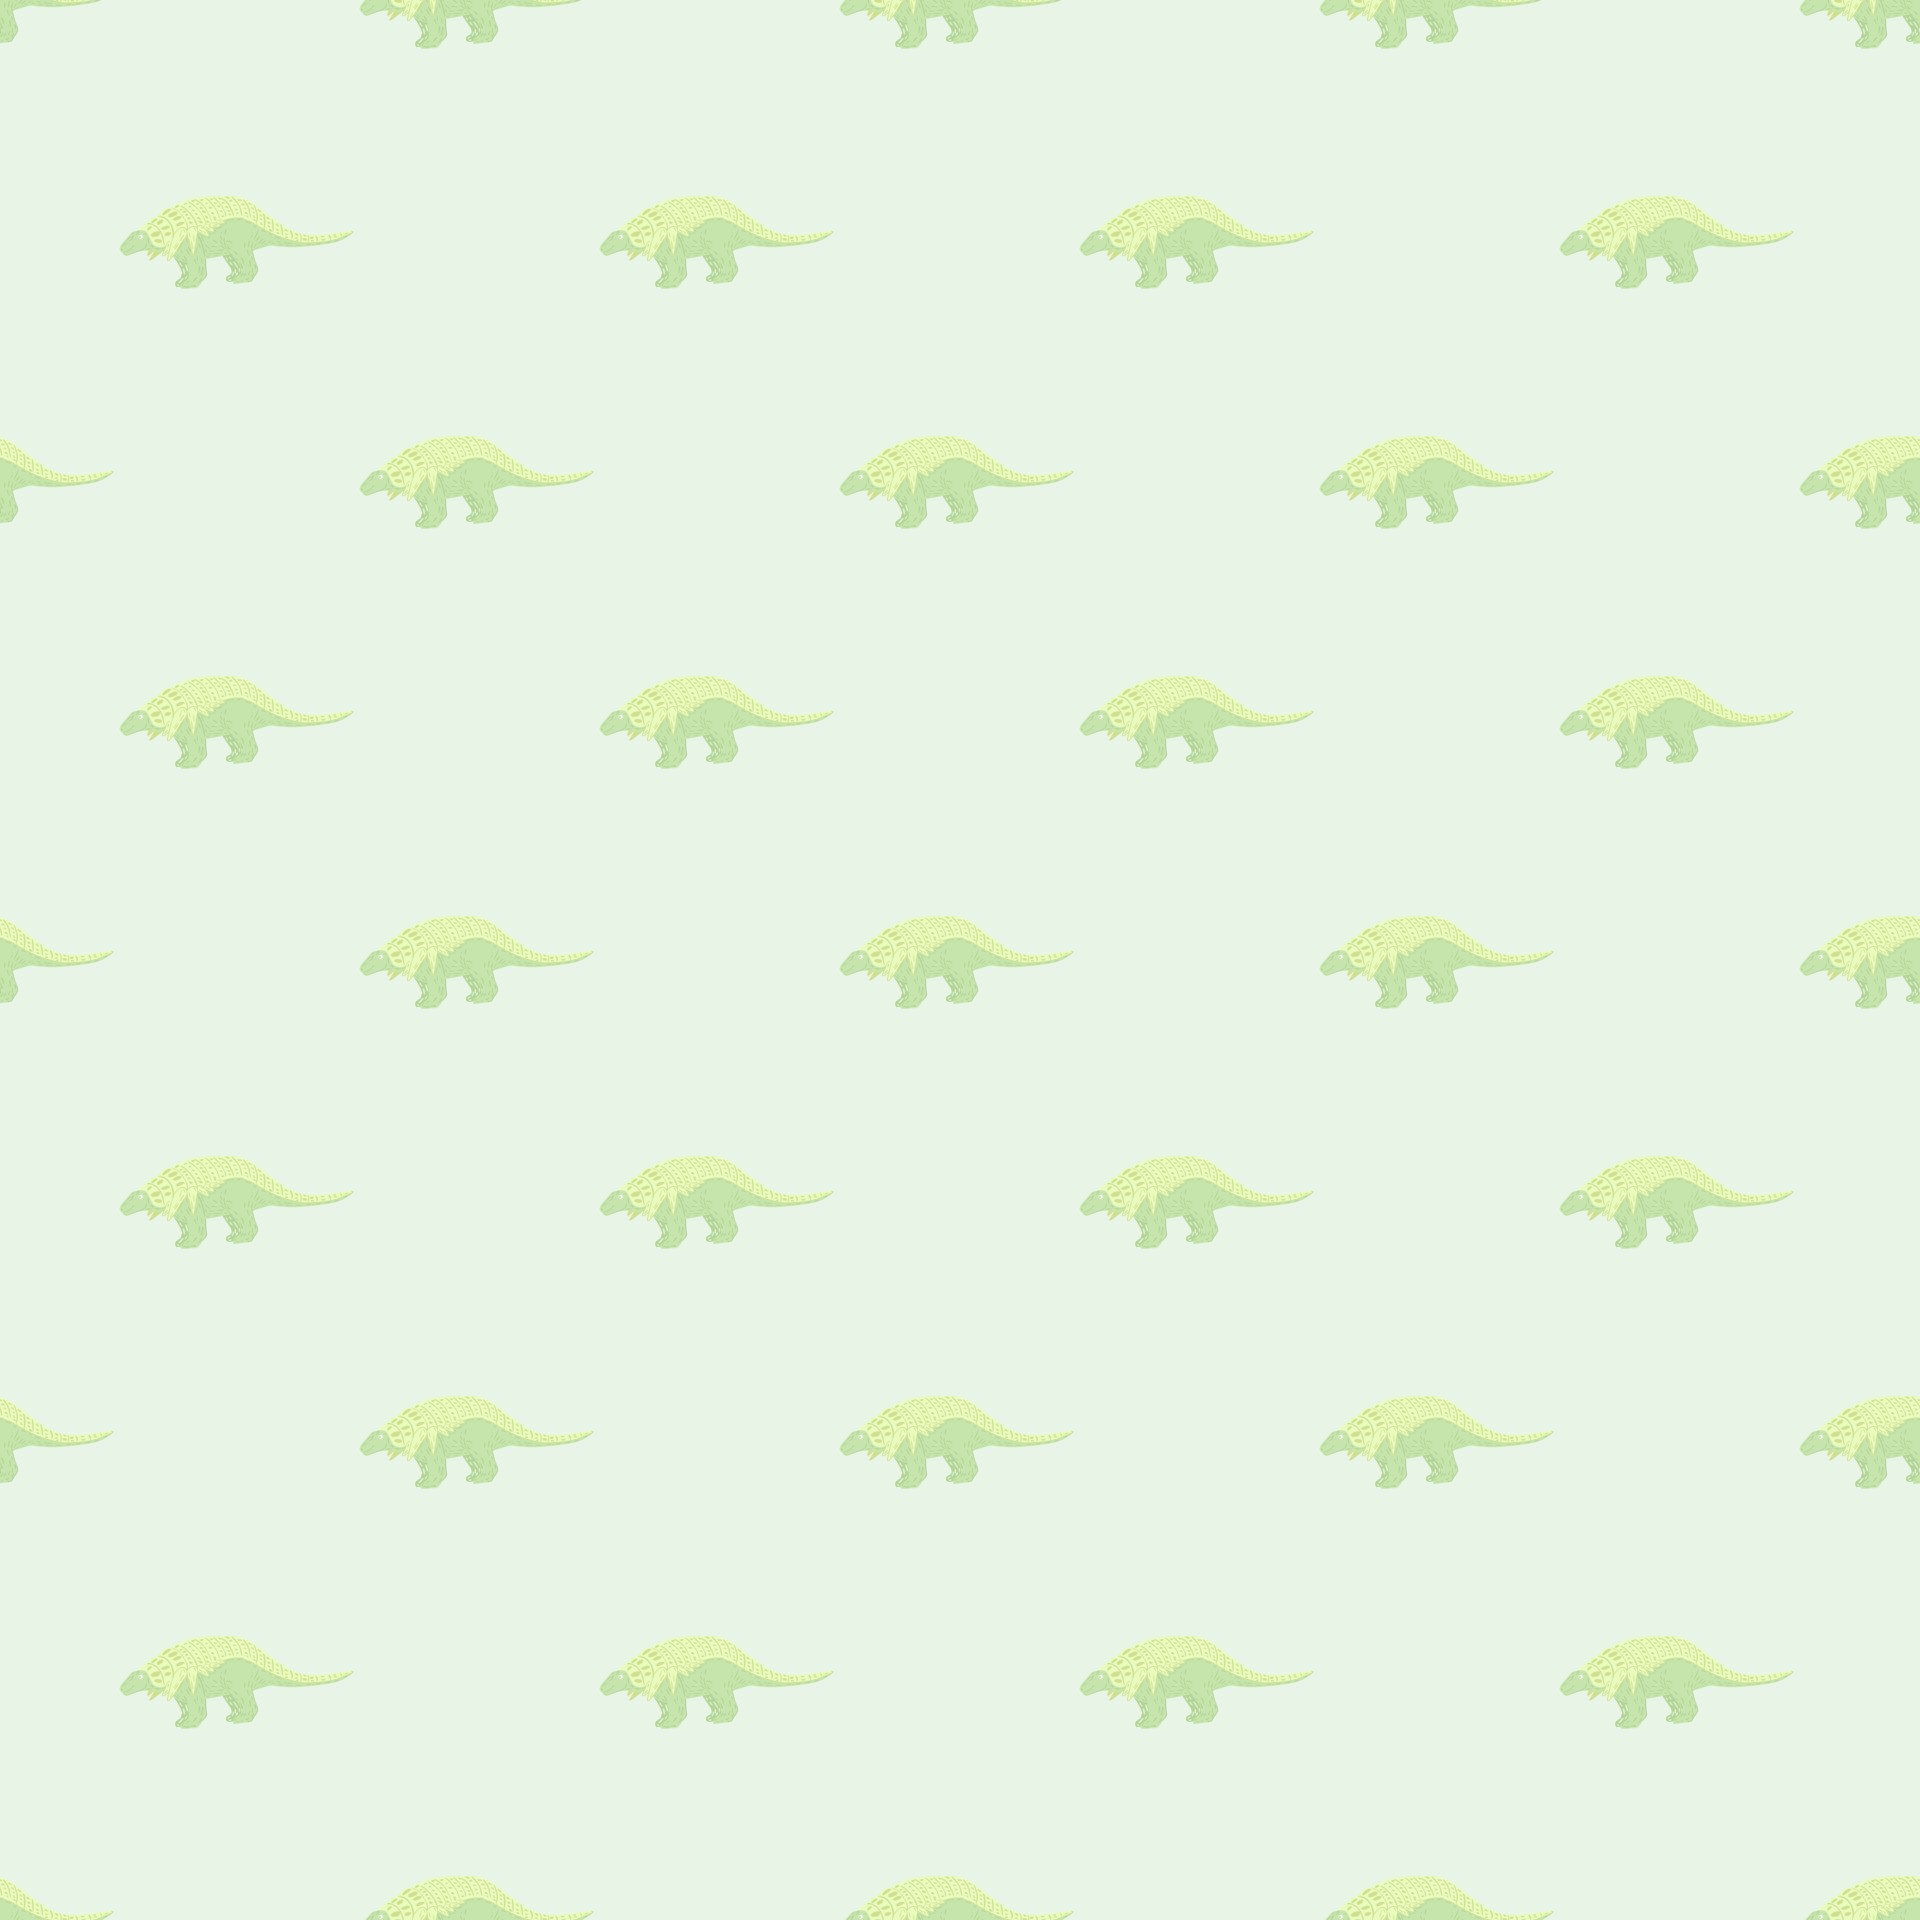 Wildlife animal seamless pattern with pastel green little dinosaurs shapes. Light backround. Jungle ancient print